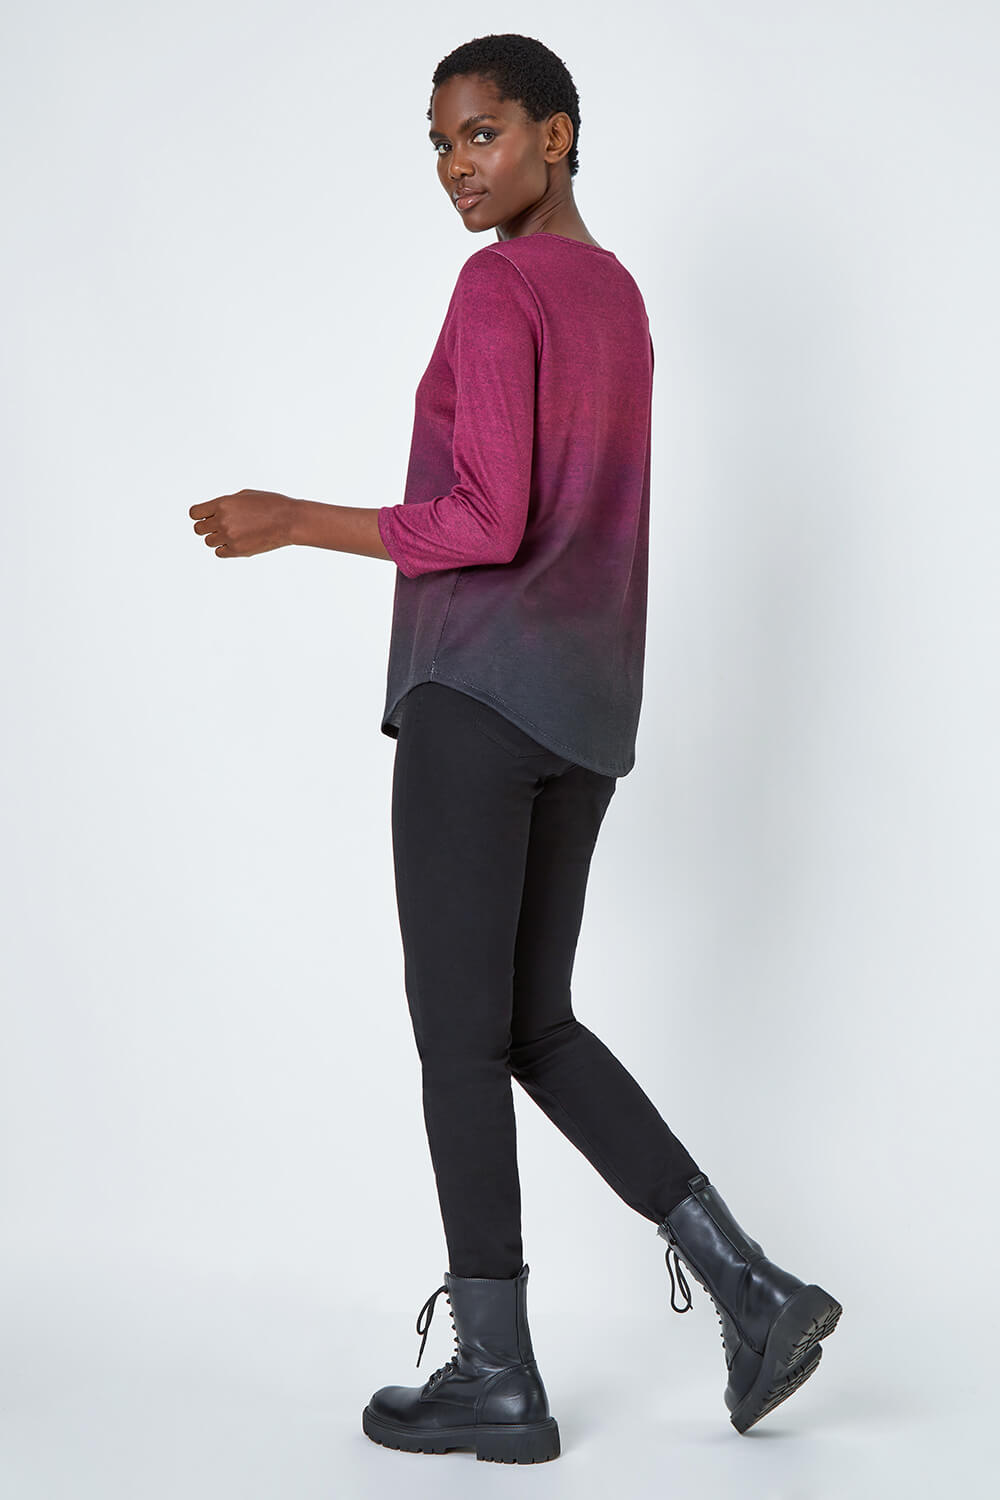 PINK Ombre Print Stretch Top, Image 3 of 5